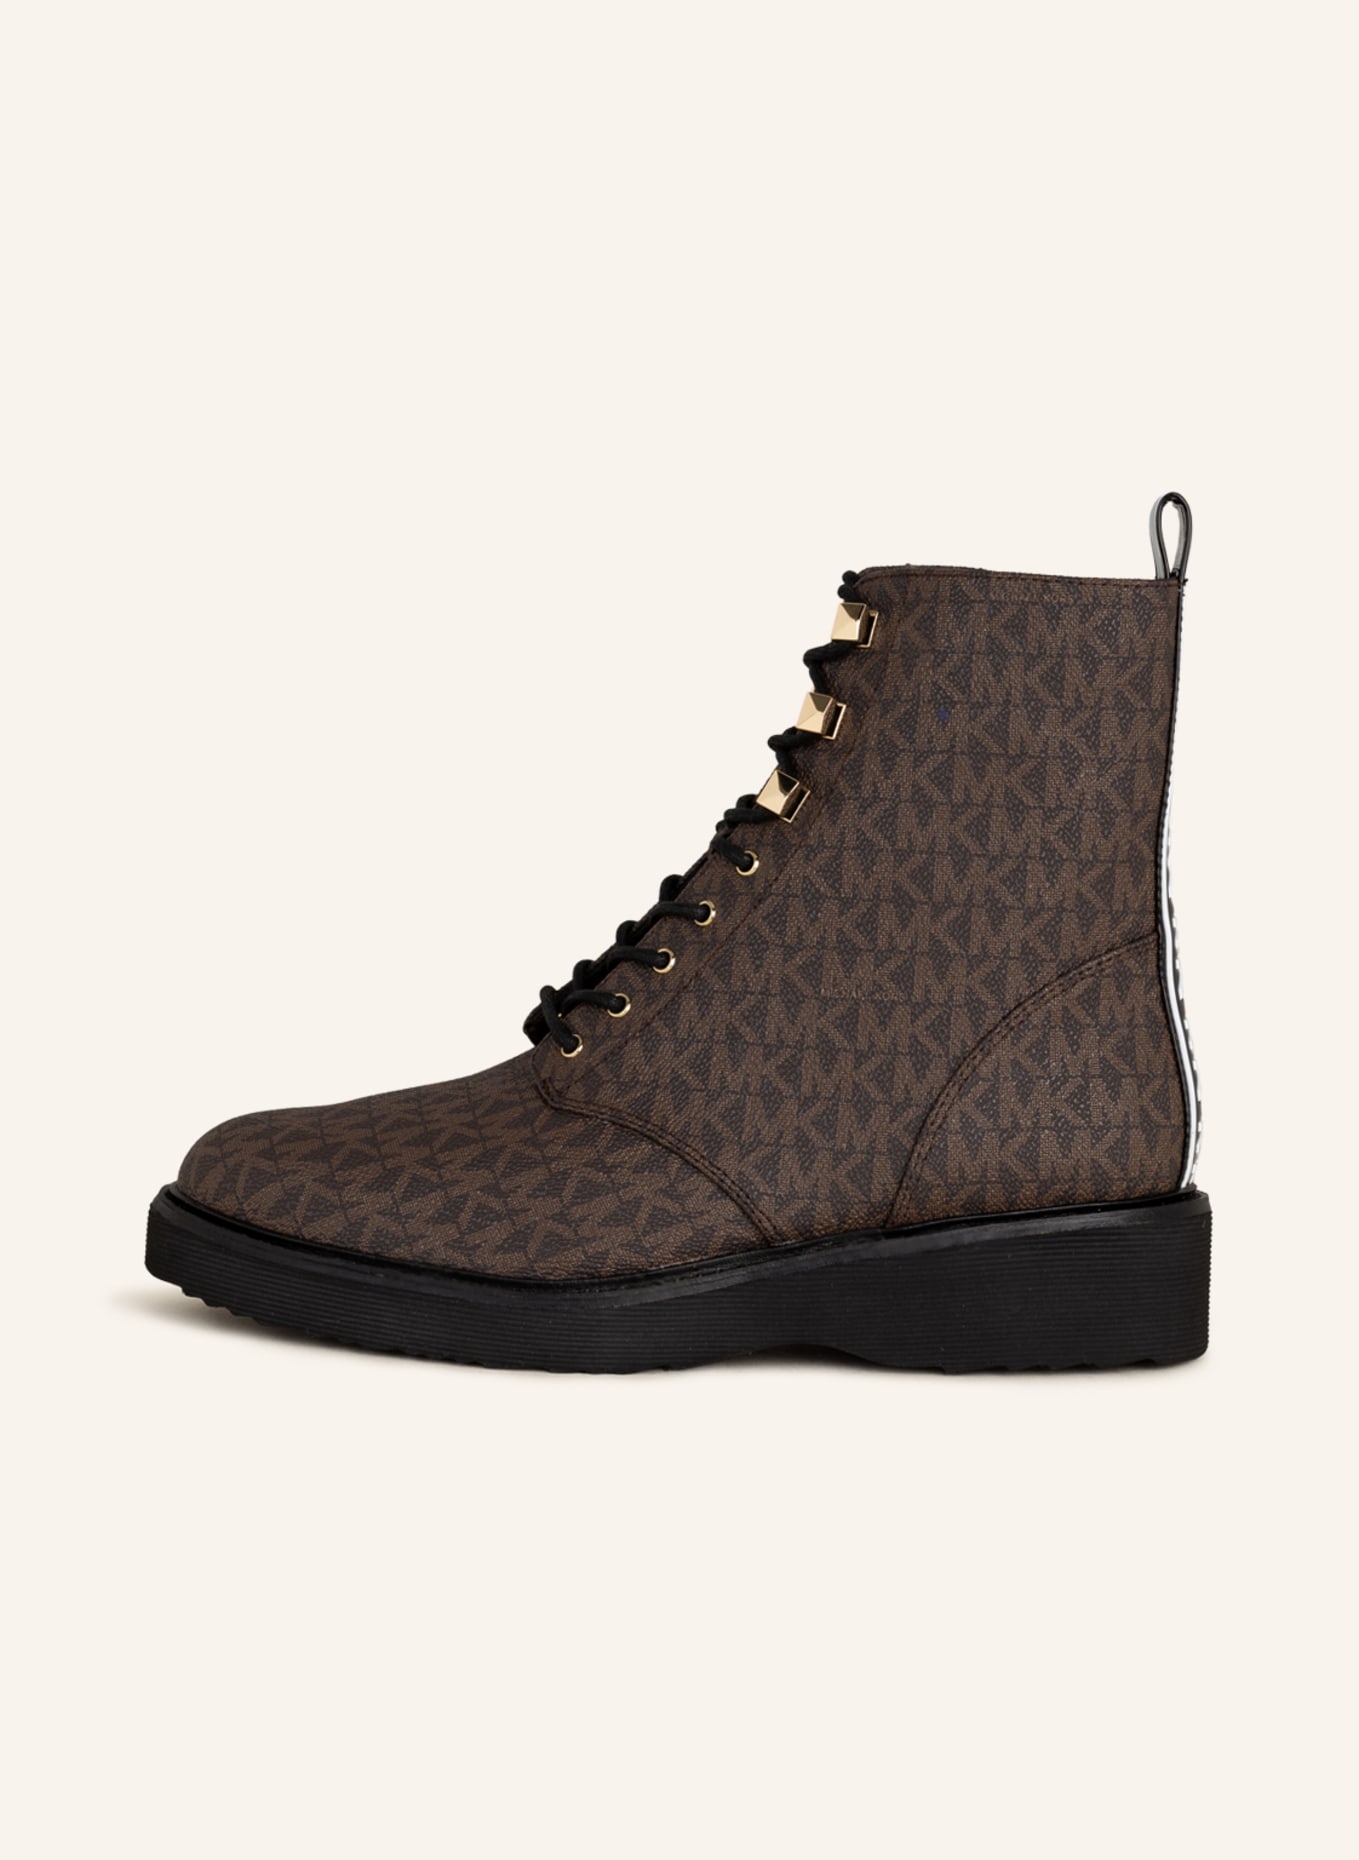 MICHAEL KORS Lace-up boots HASKELL, Color: 200 BROWN (Image 4)